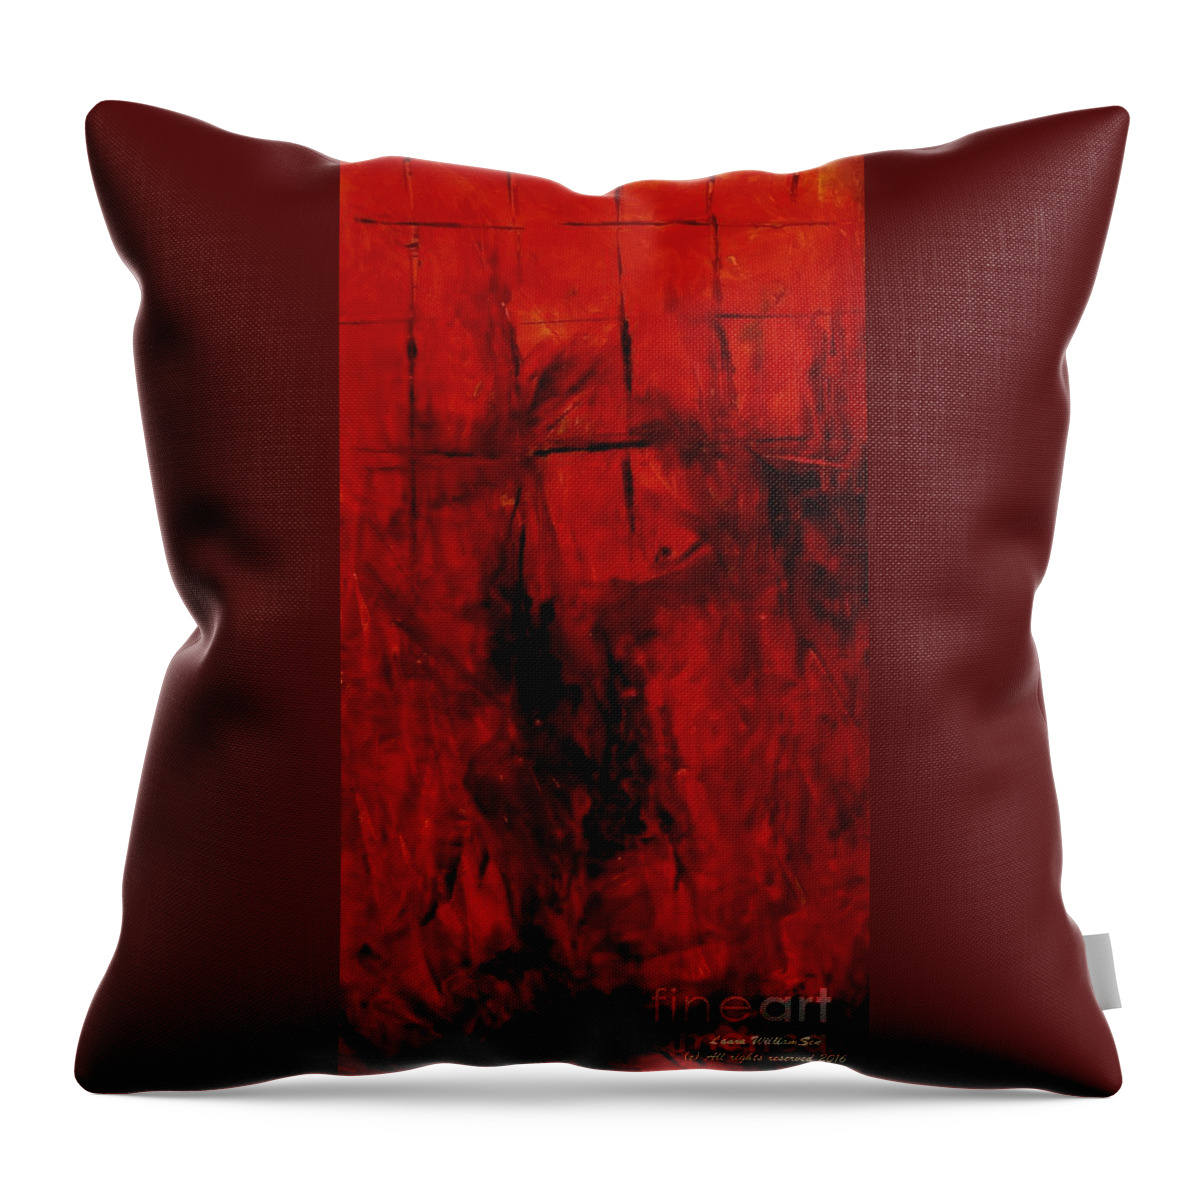 Abstract Landscapes Throw Pillow featuring the painting Acrylics #2 by Laara WilliamSen